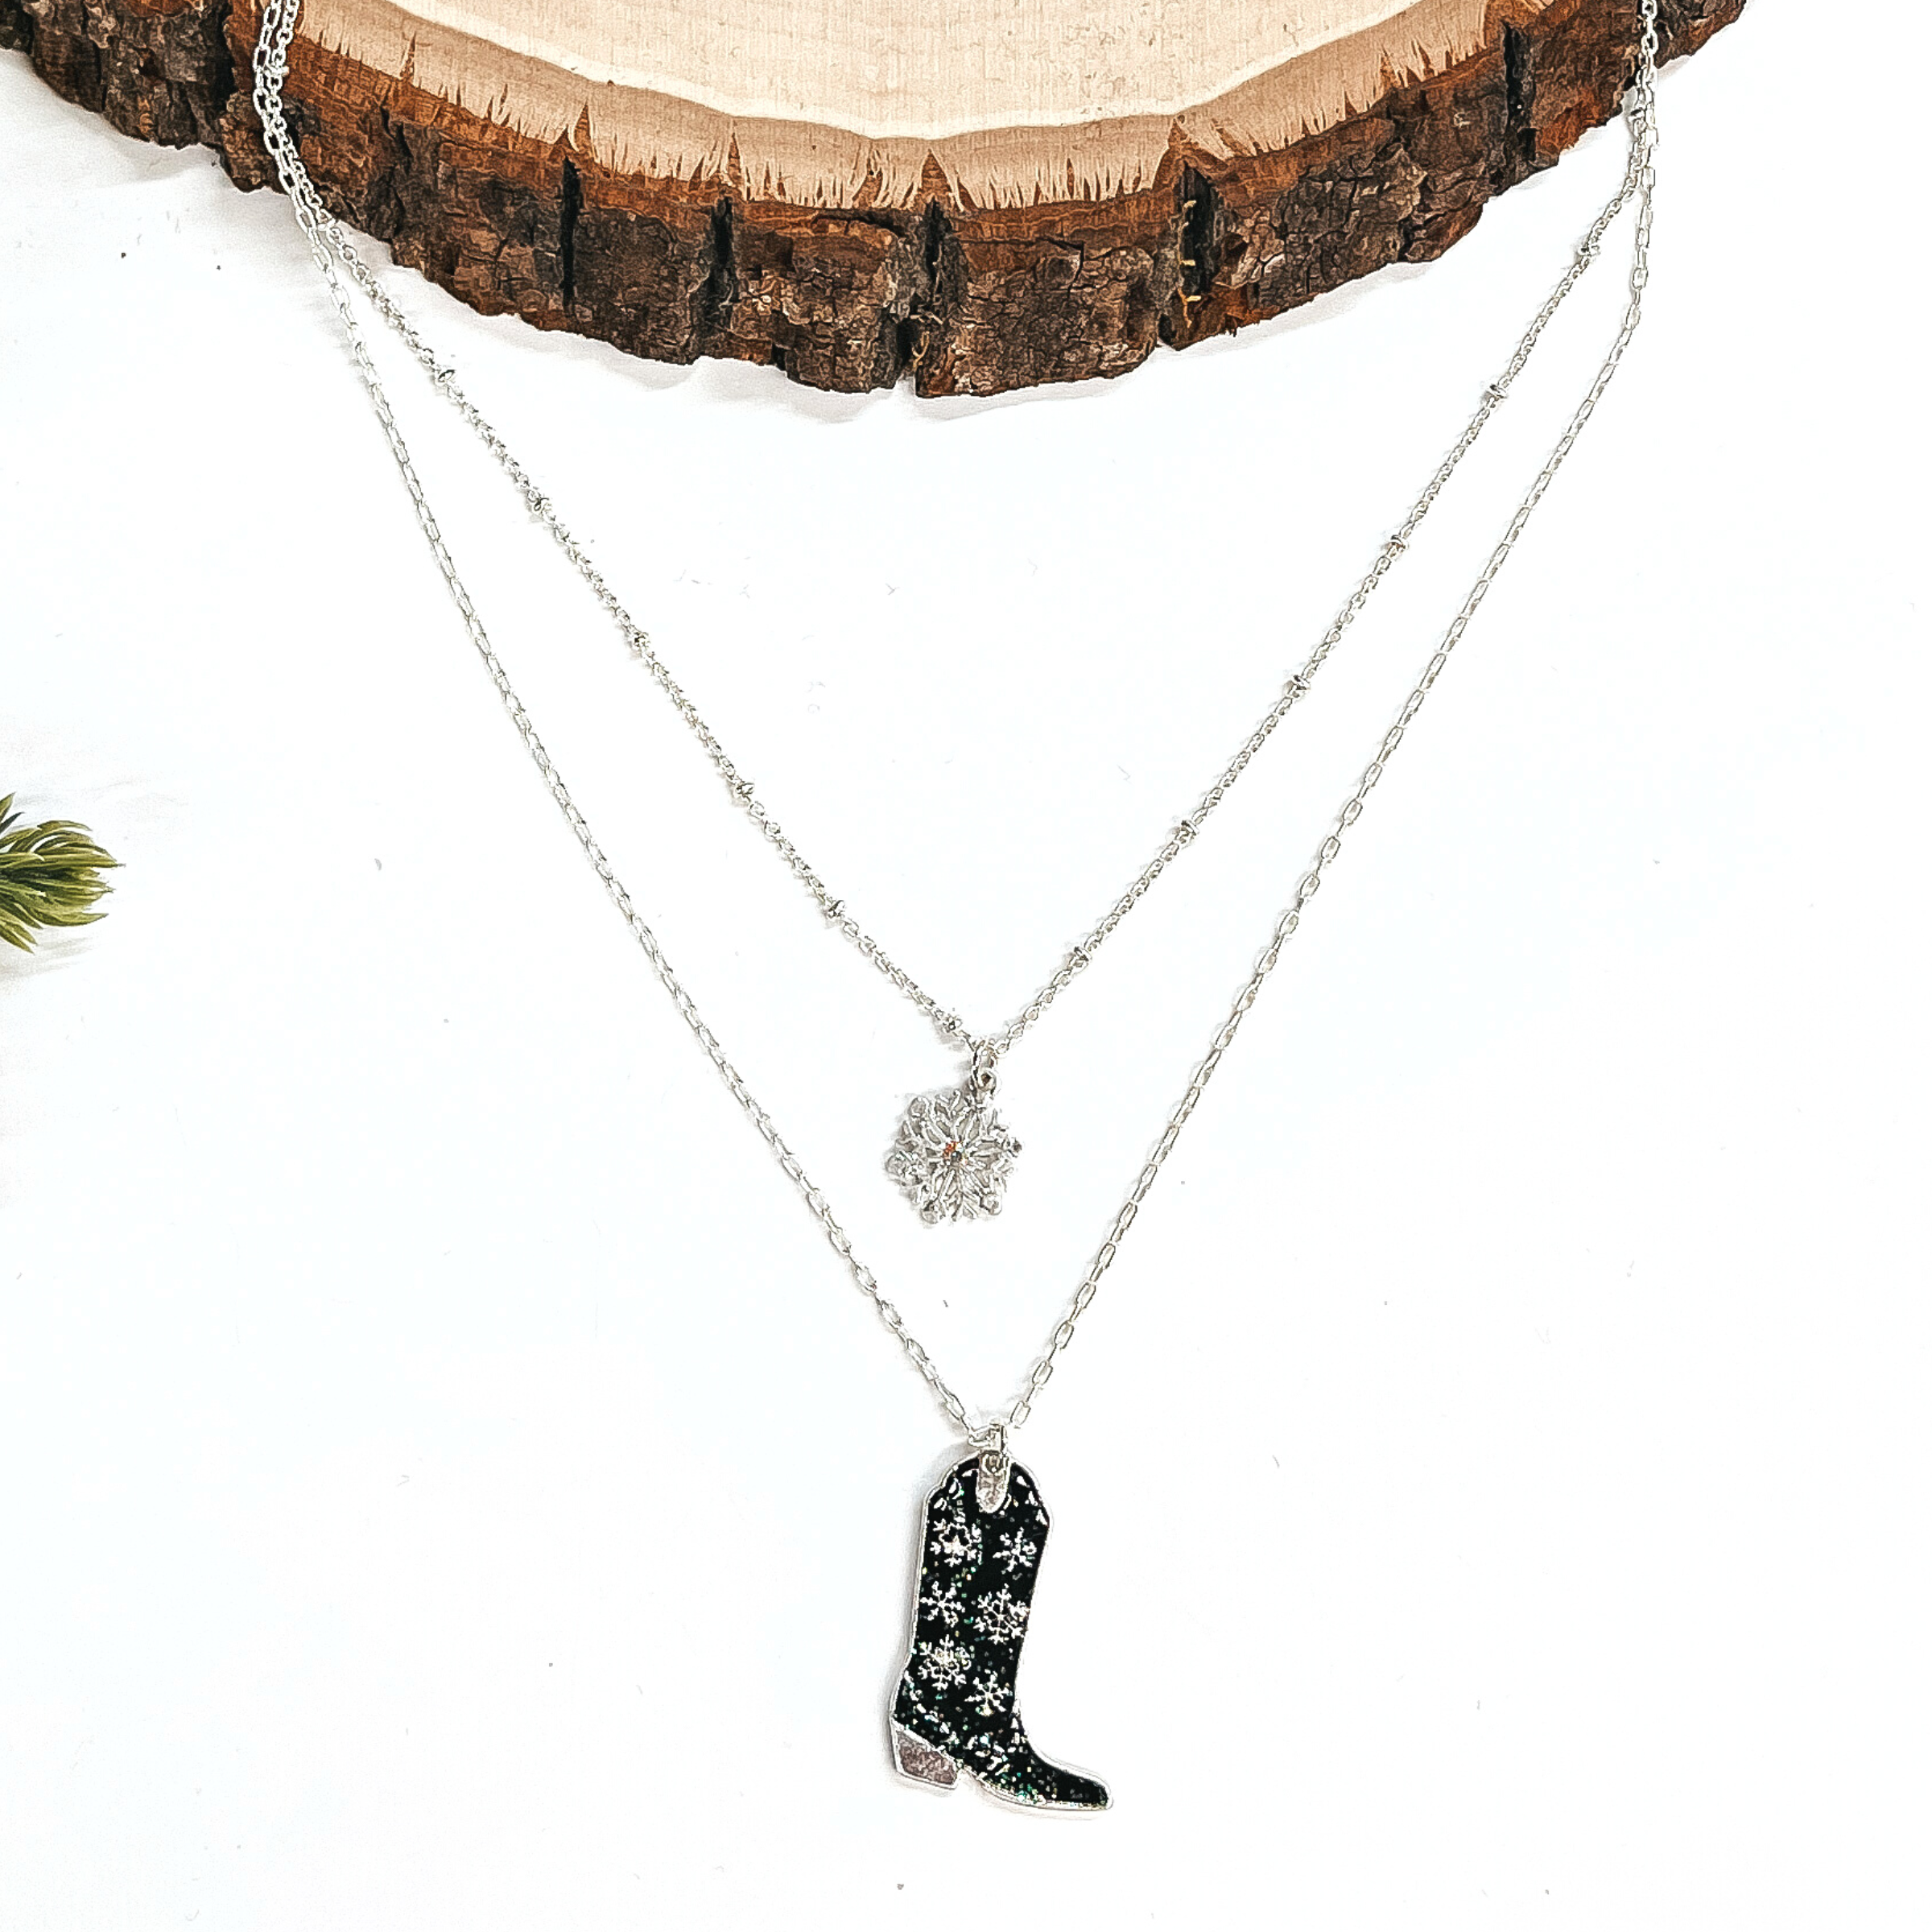 This is a double strand silver necklace with two hanging pendants.  The smaller strand has a silver snowflake charm and the longer strand has a  black glitter boot pendant. The boot pendant has a silver snowflake pattern  and the boot pendant is in a silver setting. This necklace is laying on a  white background and a slab of wood, with a pine cone tree in the side as decor.